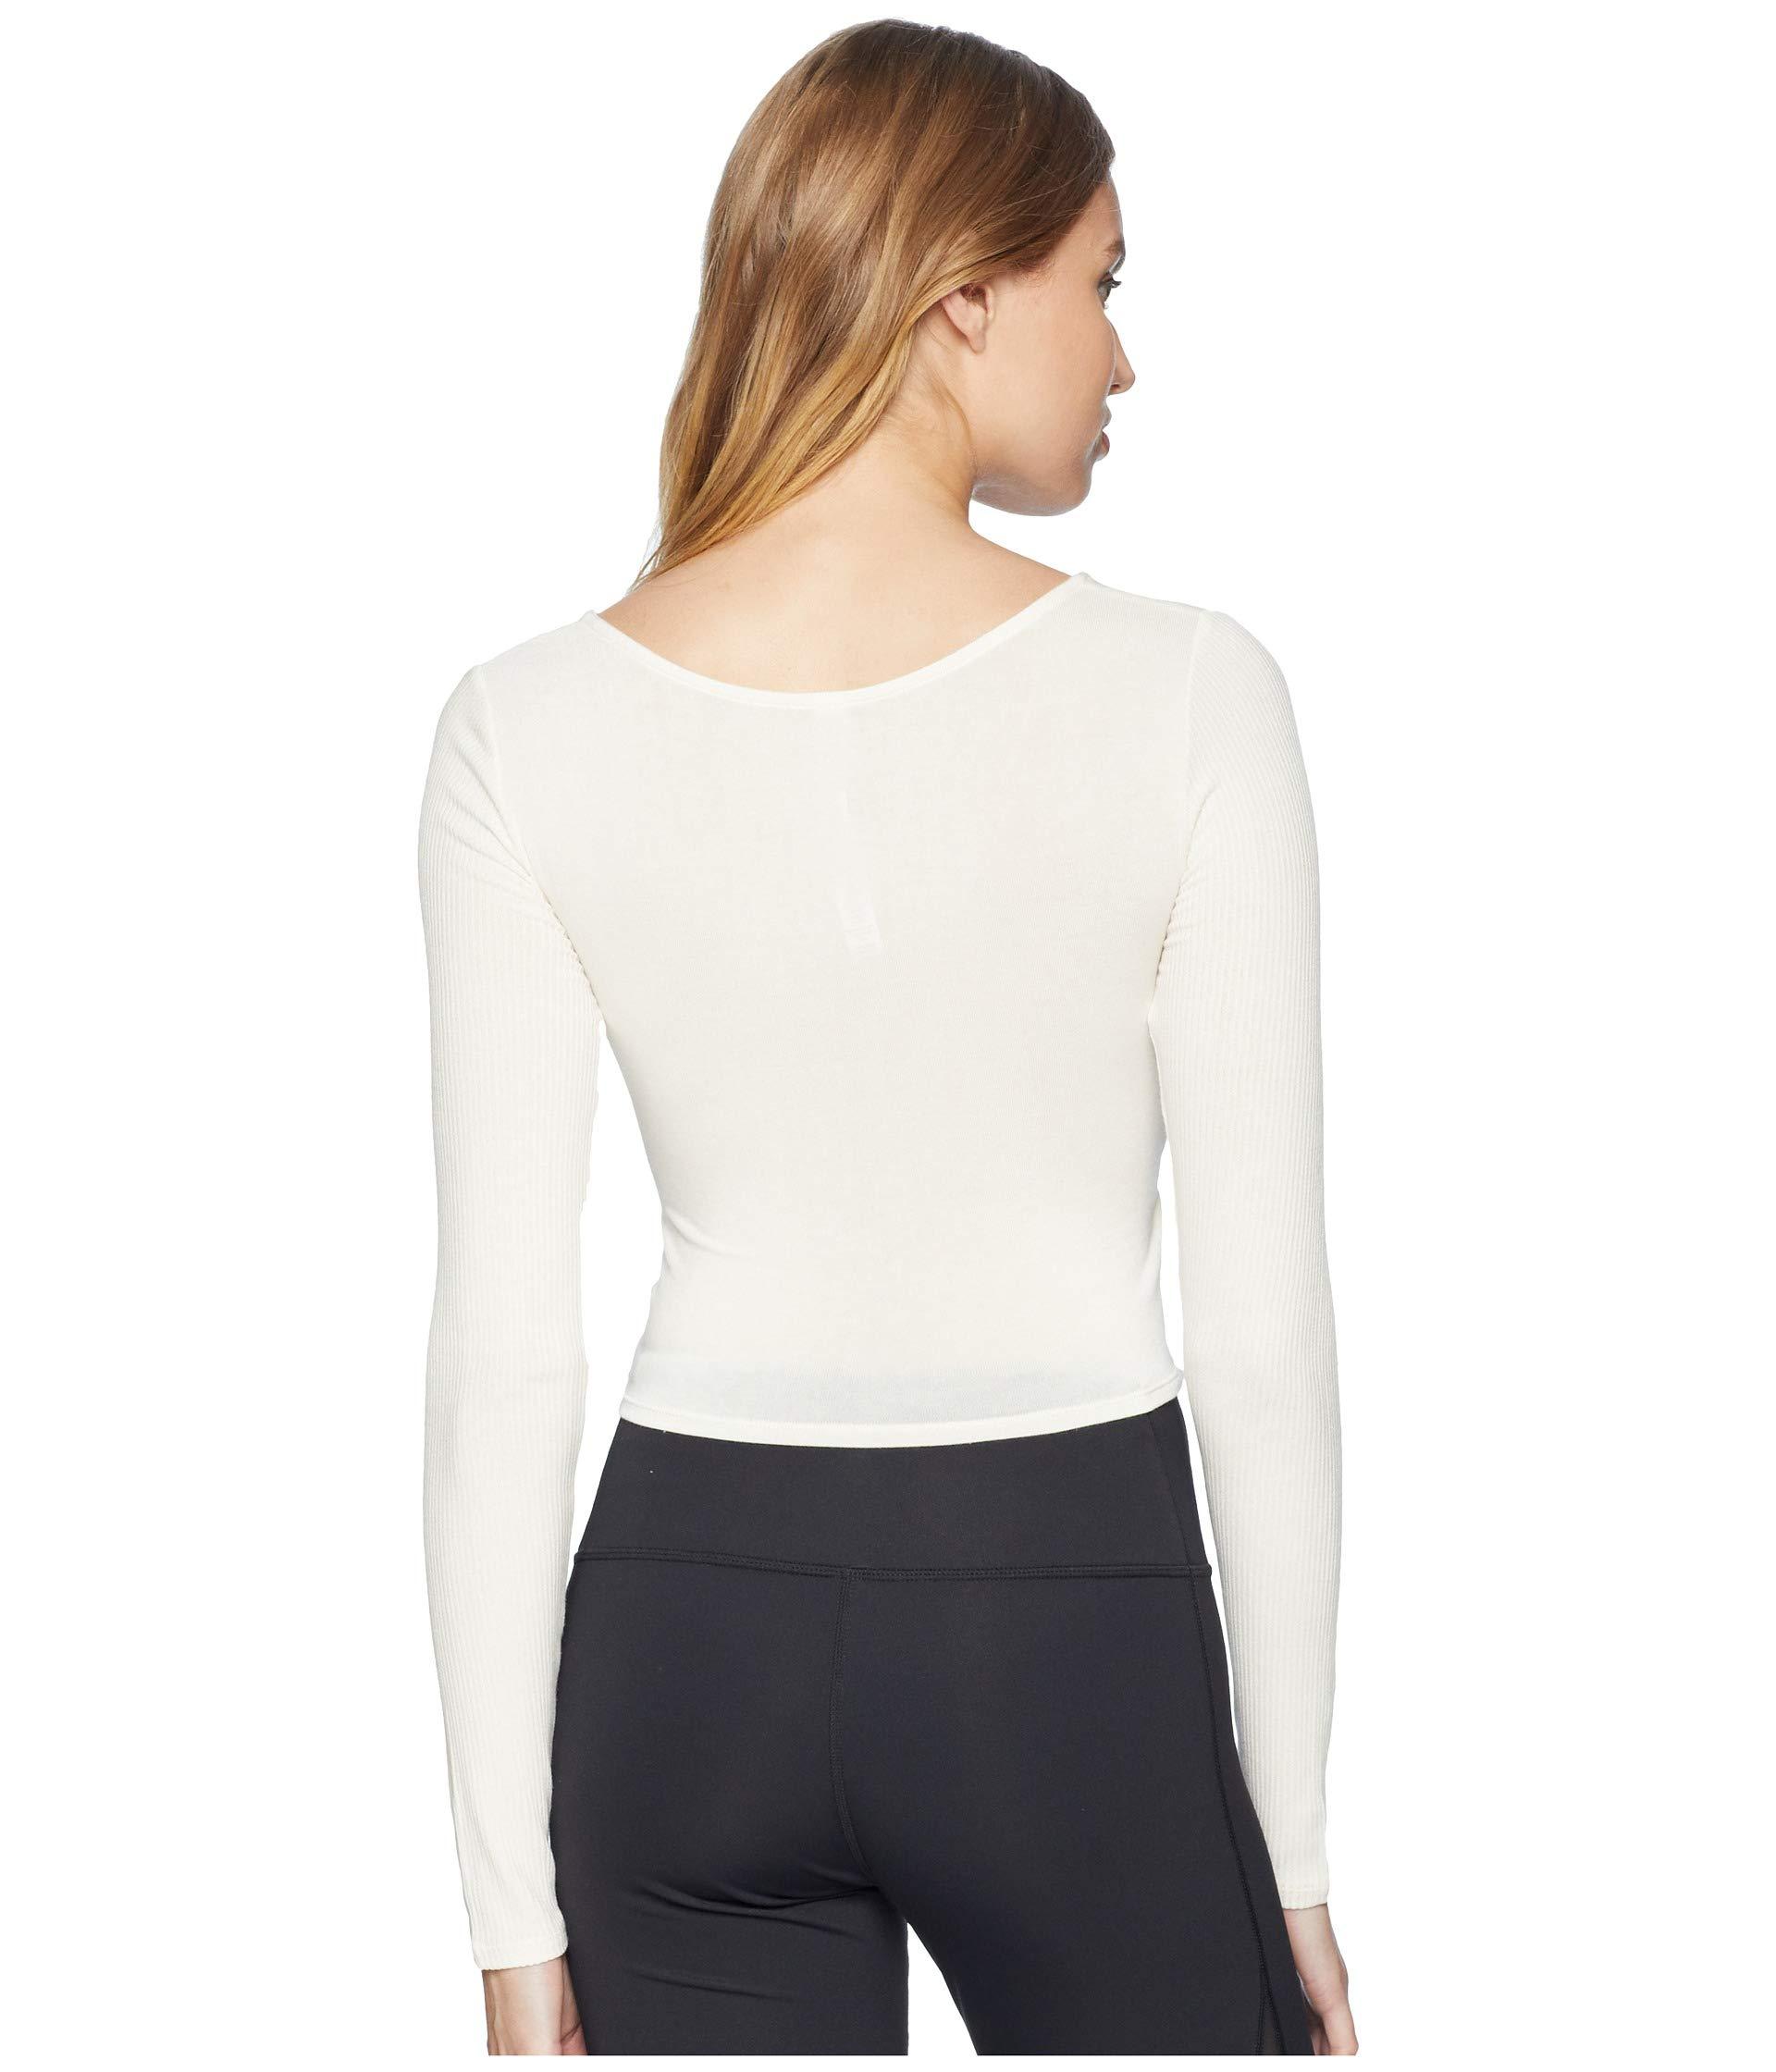 Alo Yoga Synthetic Amelia Long Sleeve Crop Top in White - Lyst